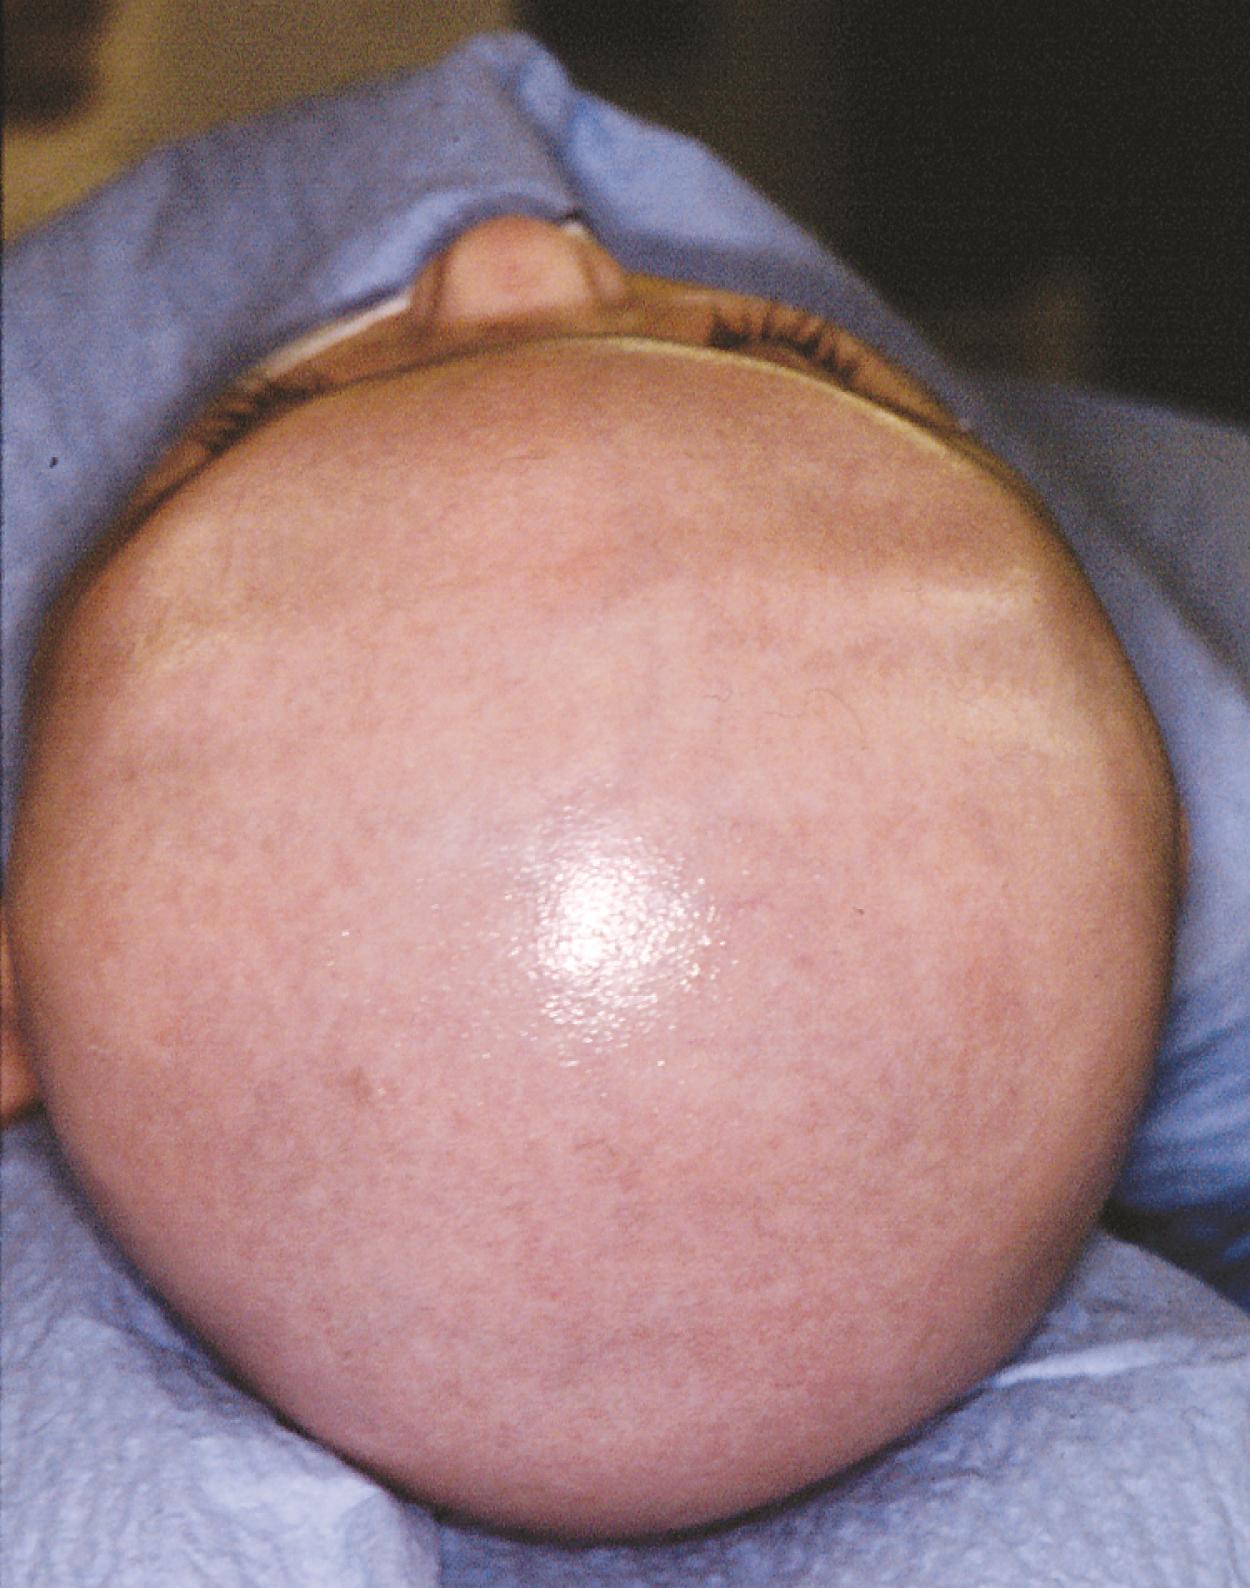 Fig. 6.9, Bilateral coronal suture synostosis resulting in brachycephaly.